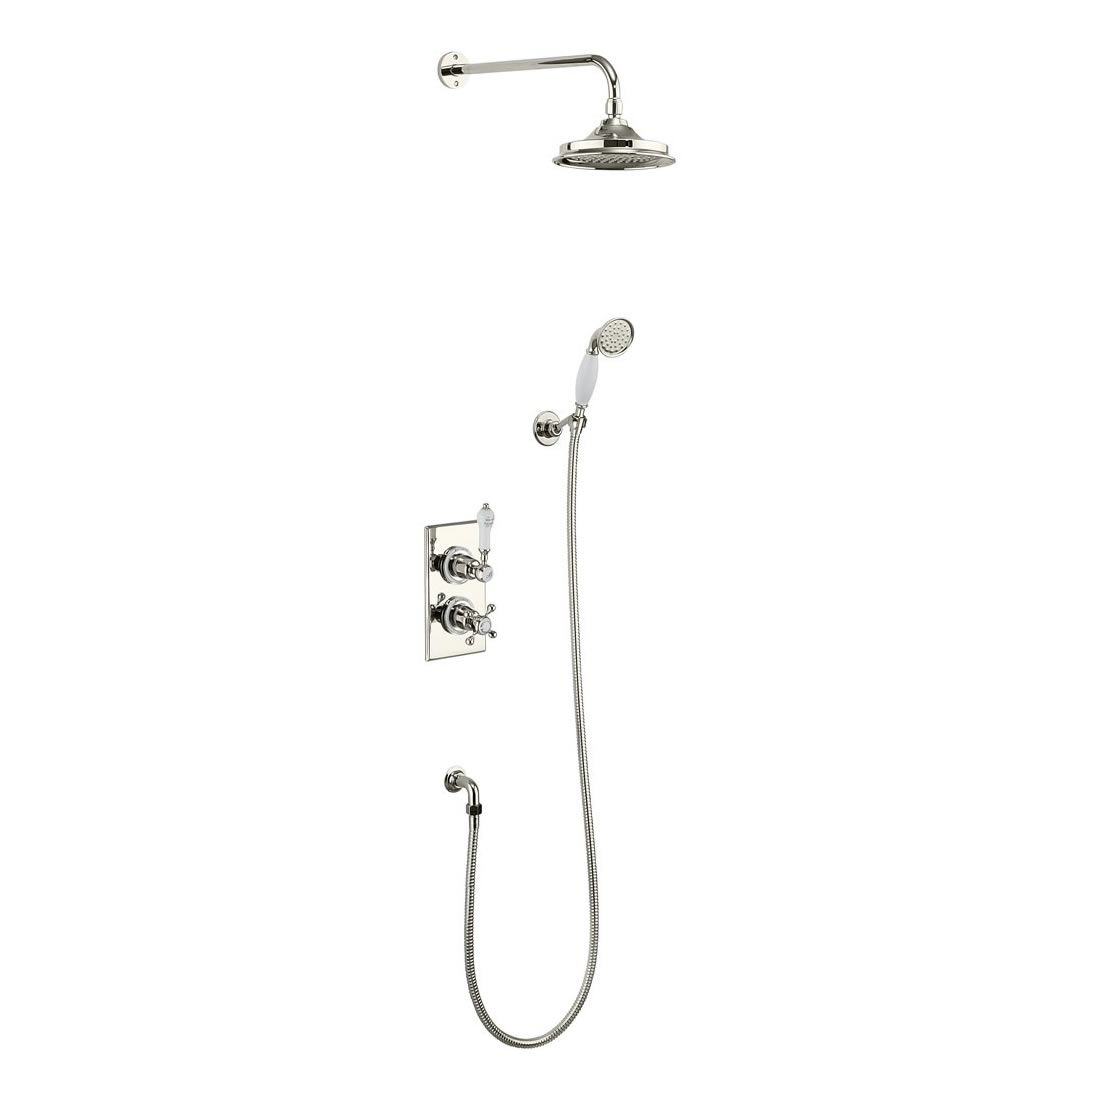 Trent Thermostatic Two Outlet Concealed Divertor  Shower Valve , Fixed Shower Arm, Handset & Holder with Hose with 12 inch rose  - NICKEL